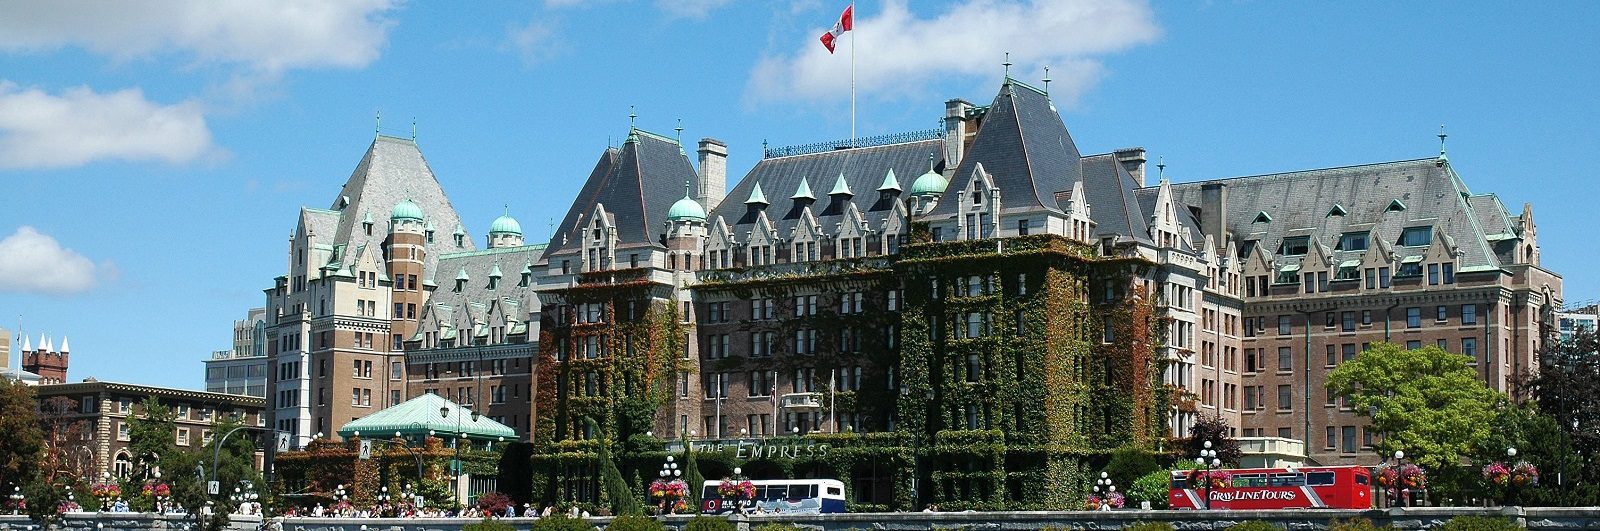 Featured image for “2021 Canadian Hotel Industry Performance”